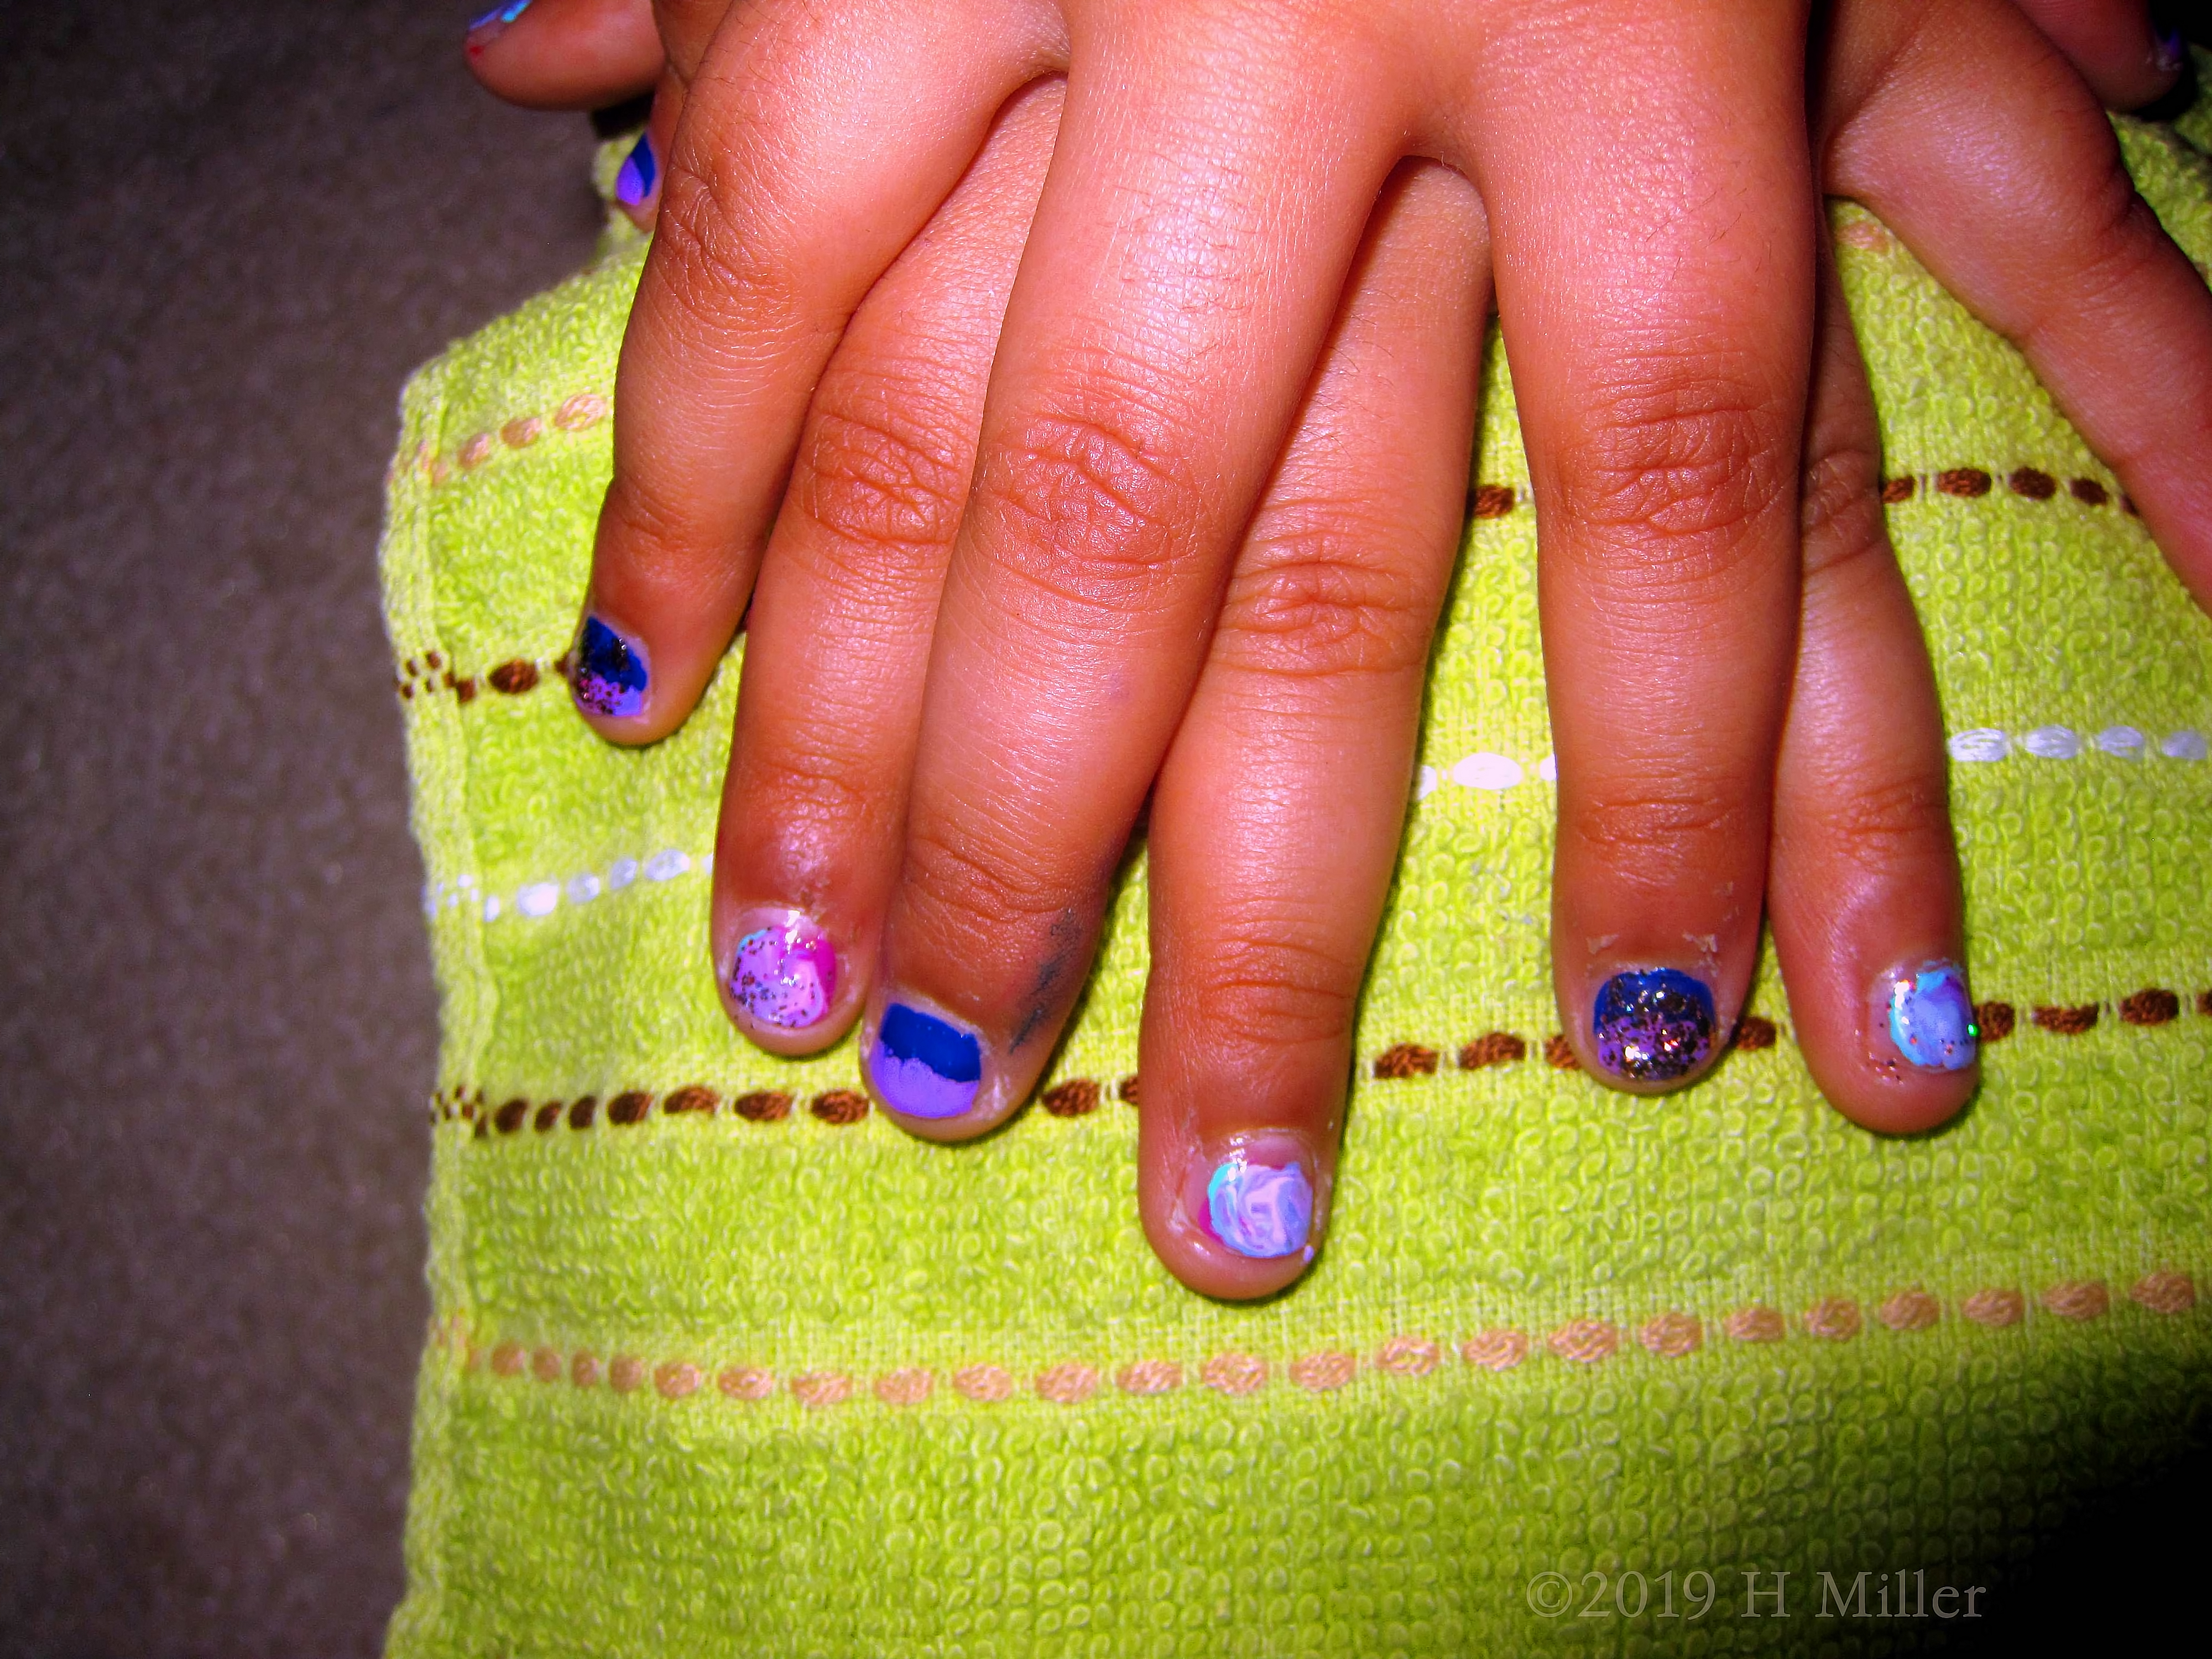 Adorable Blue, Violet Ombre Nail Design With Glittery Pink For This Mini Mani!